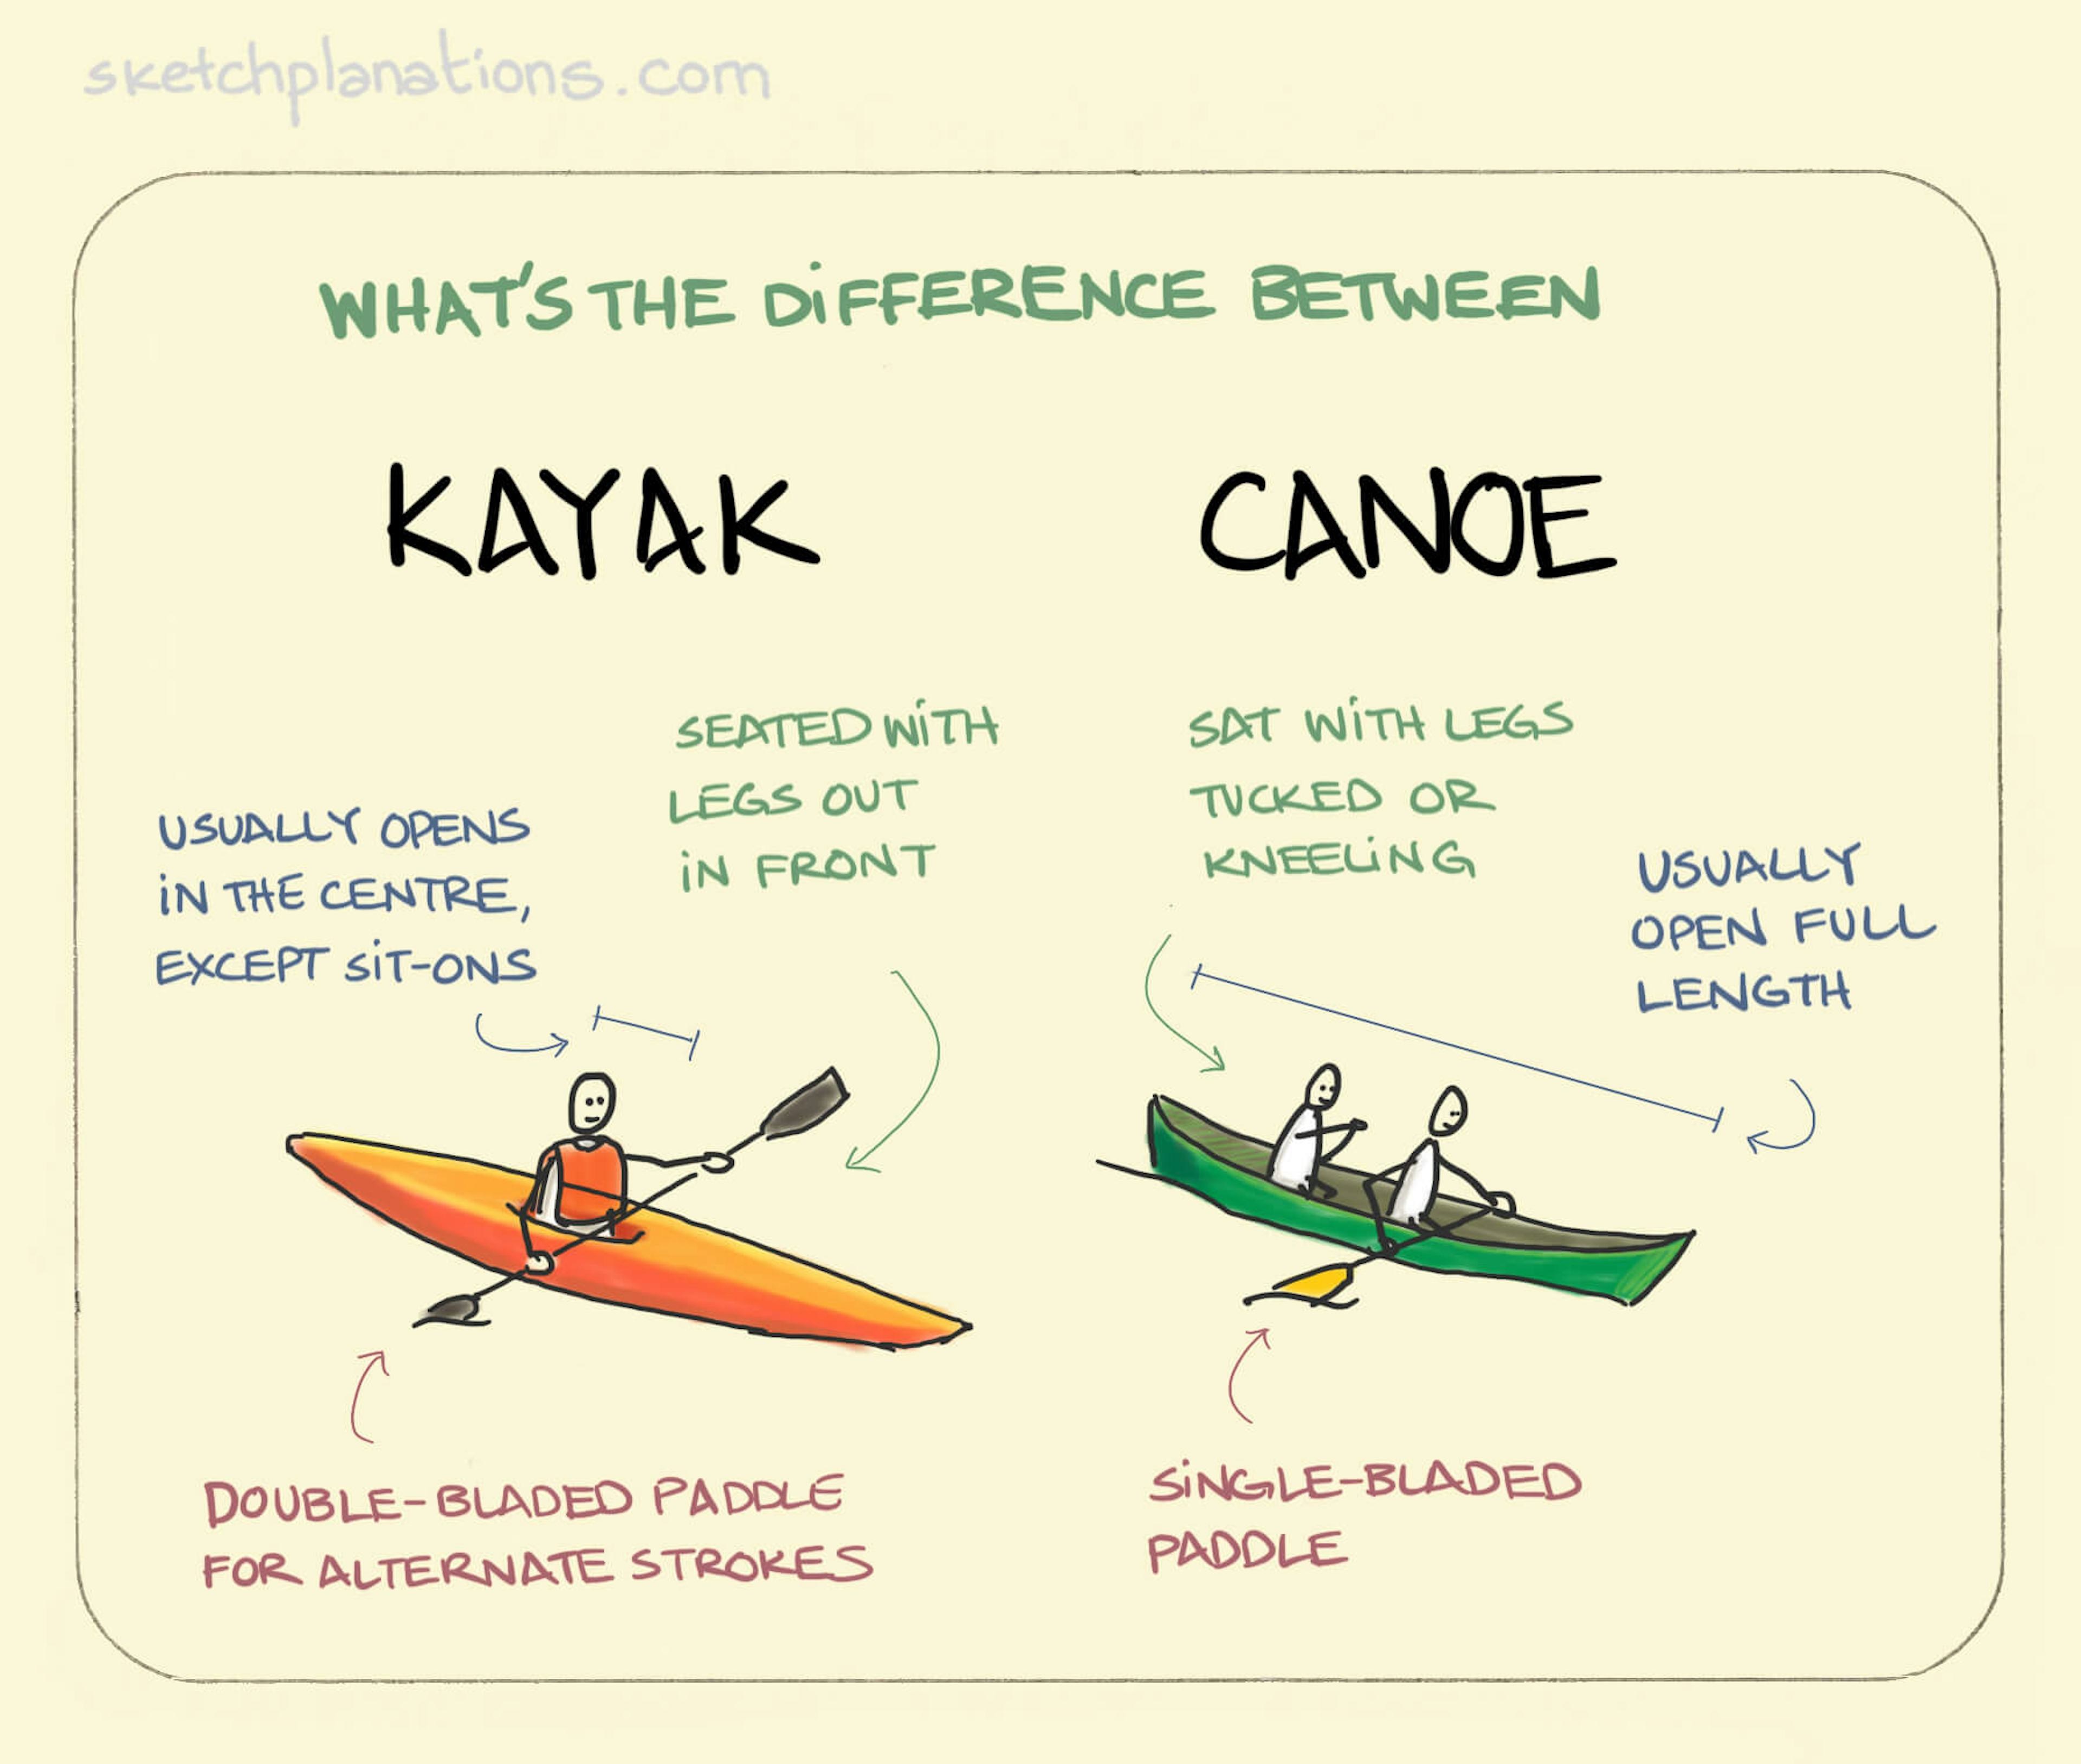 Kayak v Canoe illustration: on the left we see a kayak with one person sat with legs stretched out inside the hull with a double-bladed paddle. On the right, 2 people sit in the open canoe, each with a single-bladed paddle. 